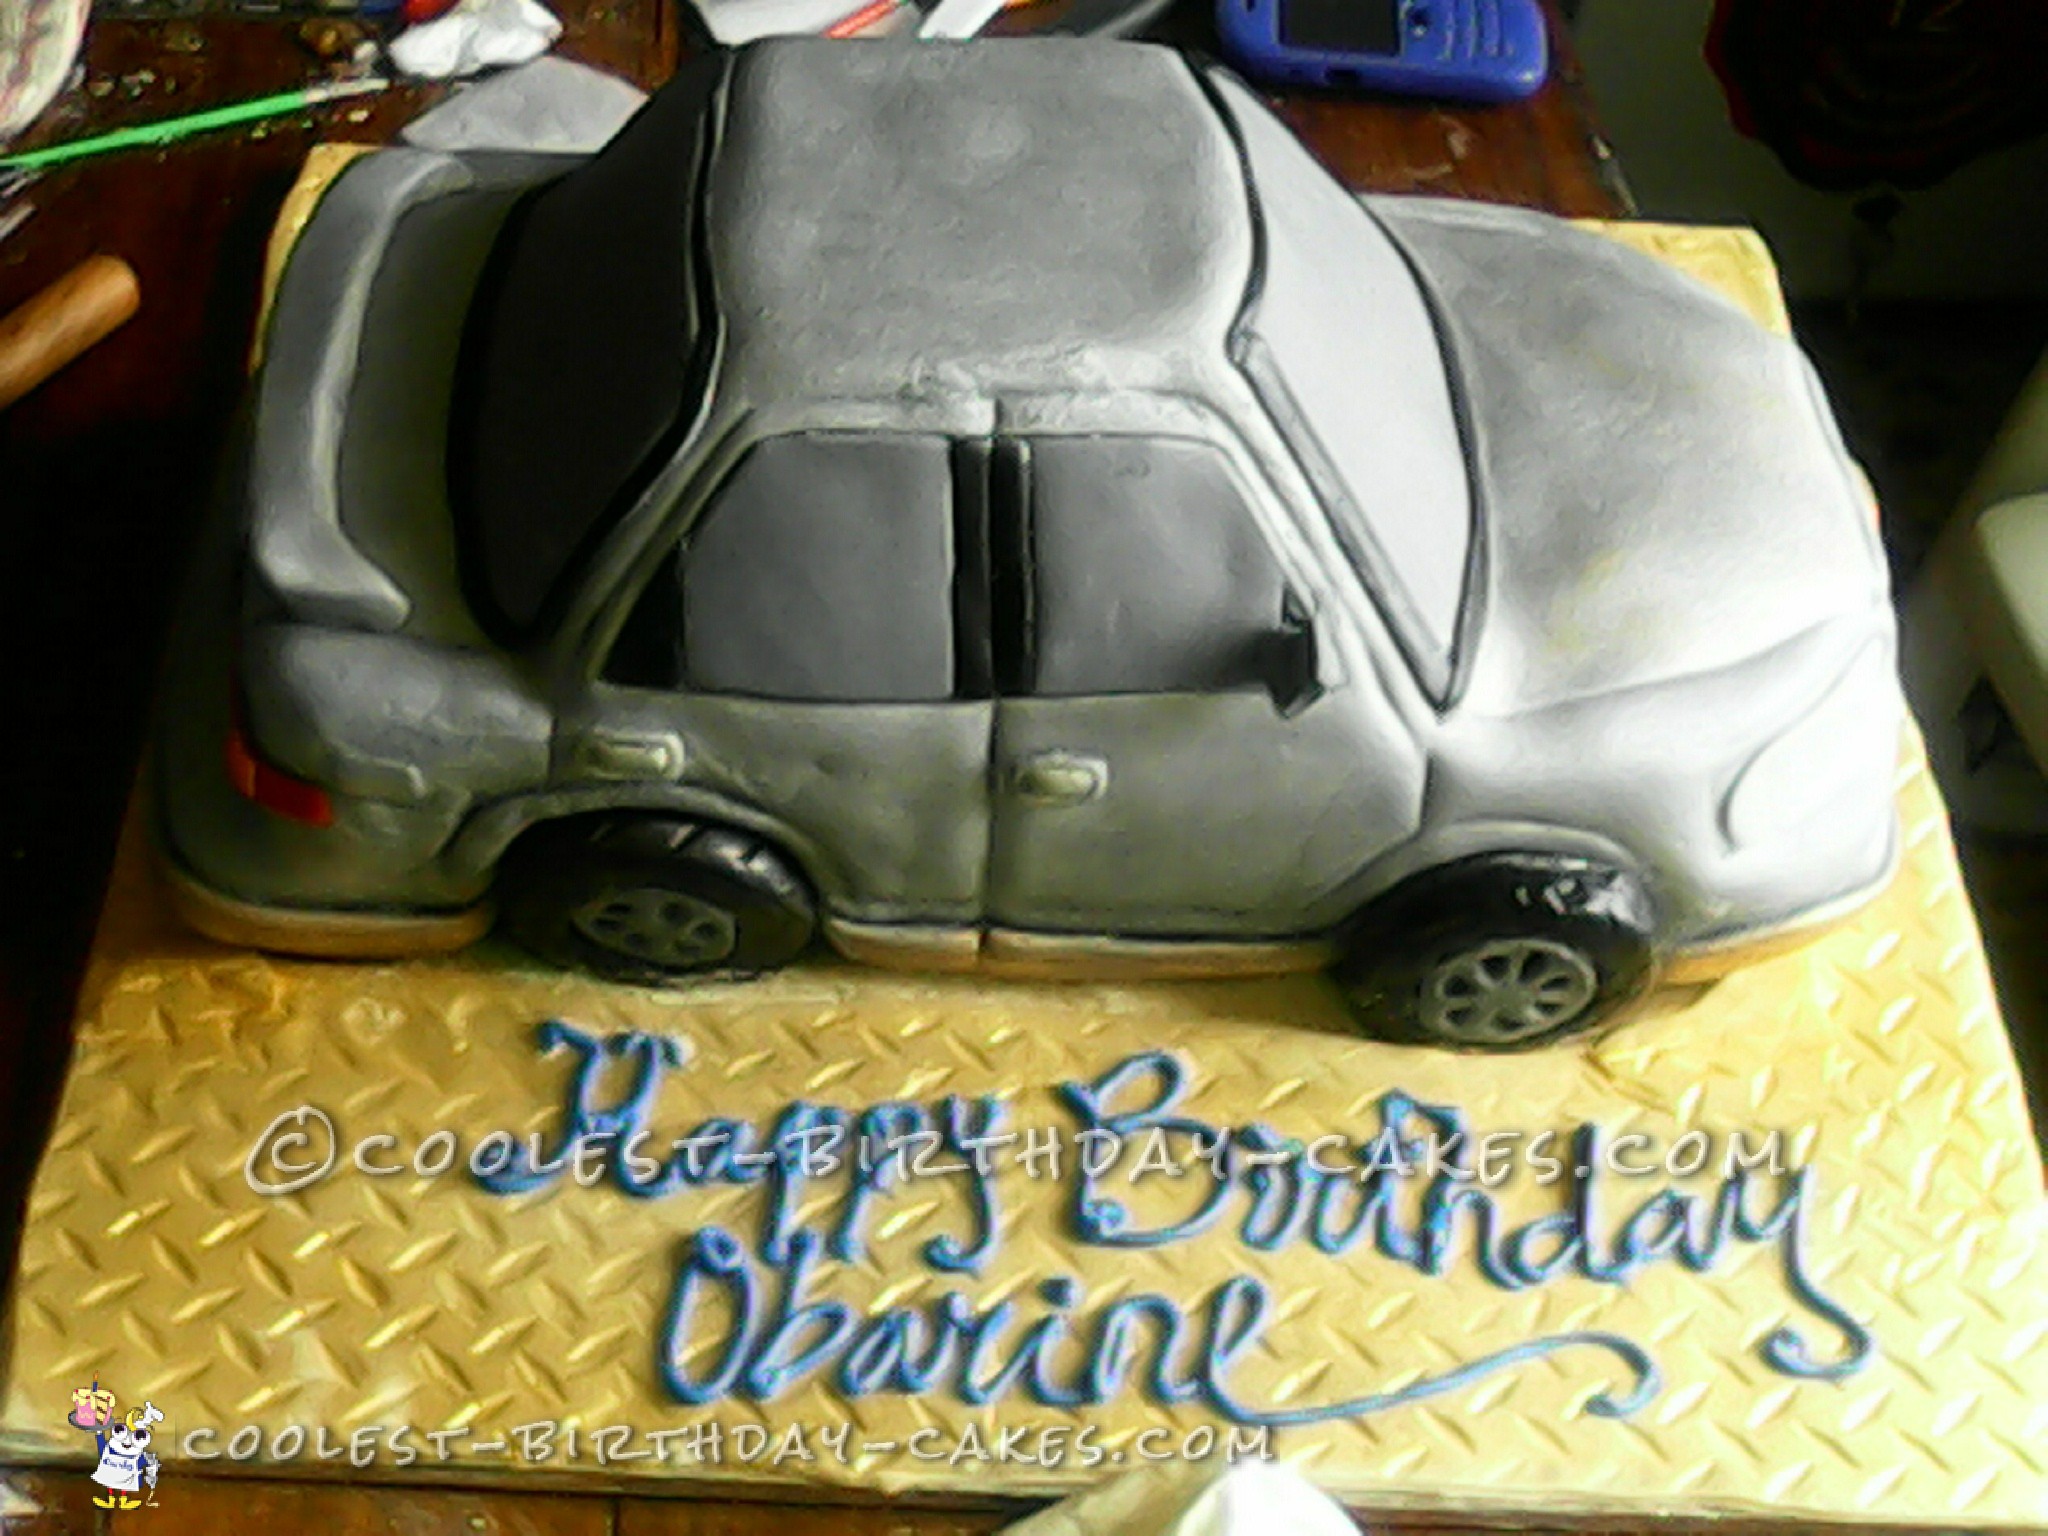 Coolest Camry Birthdy Cake for 10 Year Old